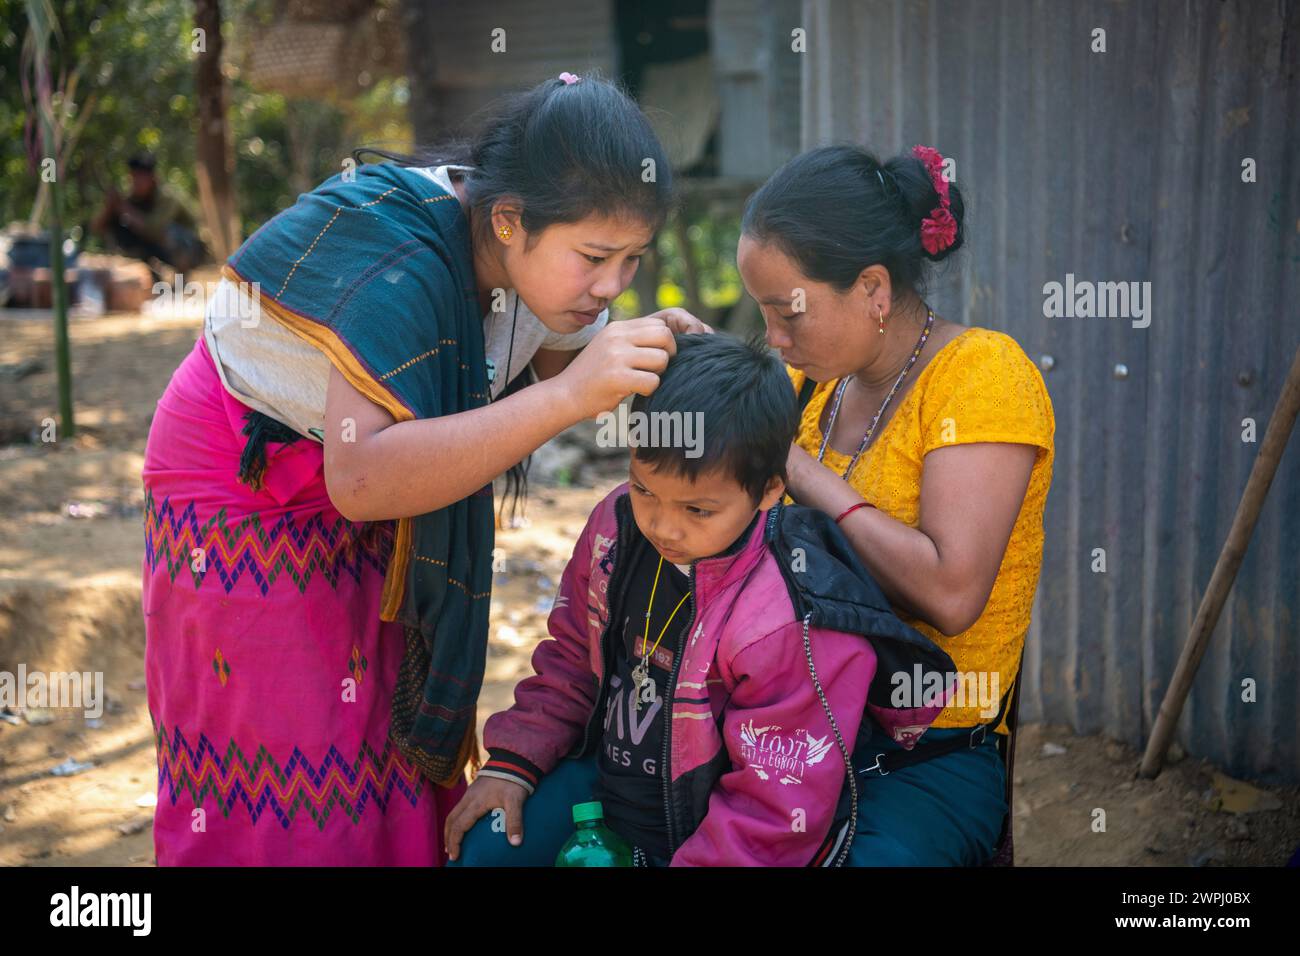 Two Mro women pick lice from a child's head. Mro people are an indigenous ethnic group in Bangladesh. They primarily inhabit the Chittagong Hill Tracts (CHT) region, which includes districts such as Bandarban, Rangamati, and Khagrachari. The Mro people are one of the many indigenous communities in Bangladesh, and they have a distinct cultural identity, language, and traditional way of life. Stock Photo